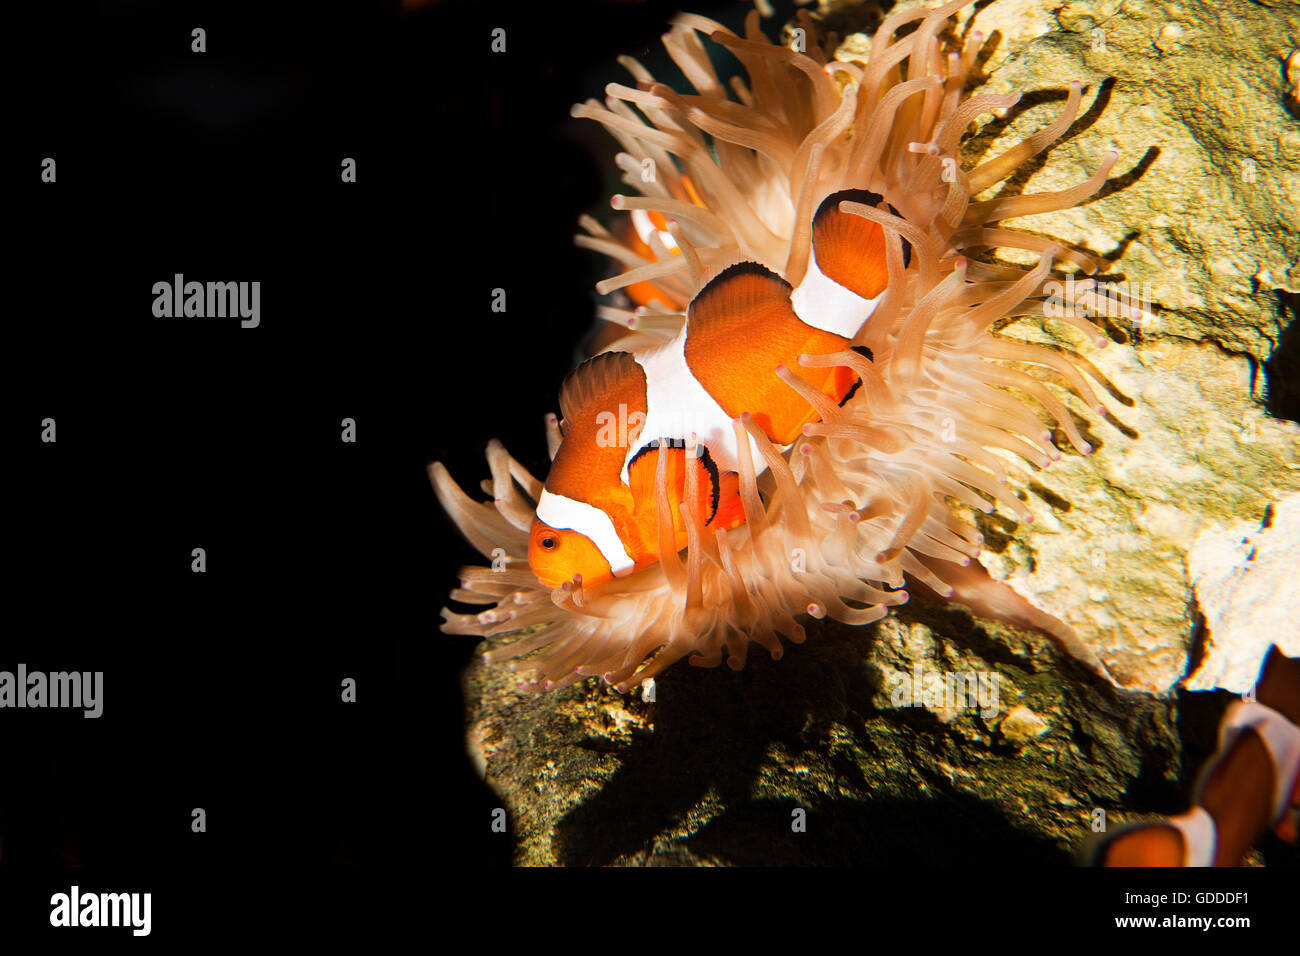 Ocellaris Clownfish, amphiprion ocellaris, Adult standing in Sea Anemone, South Africa Stock Photo